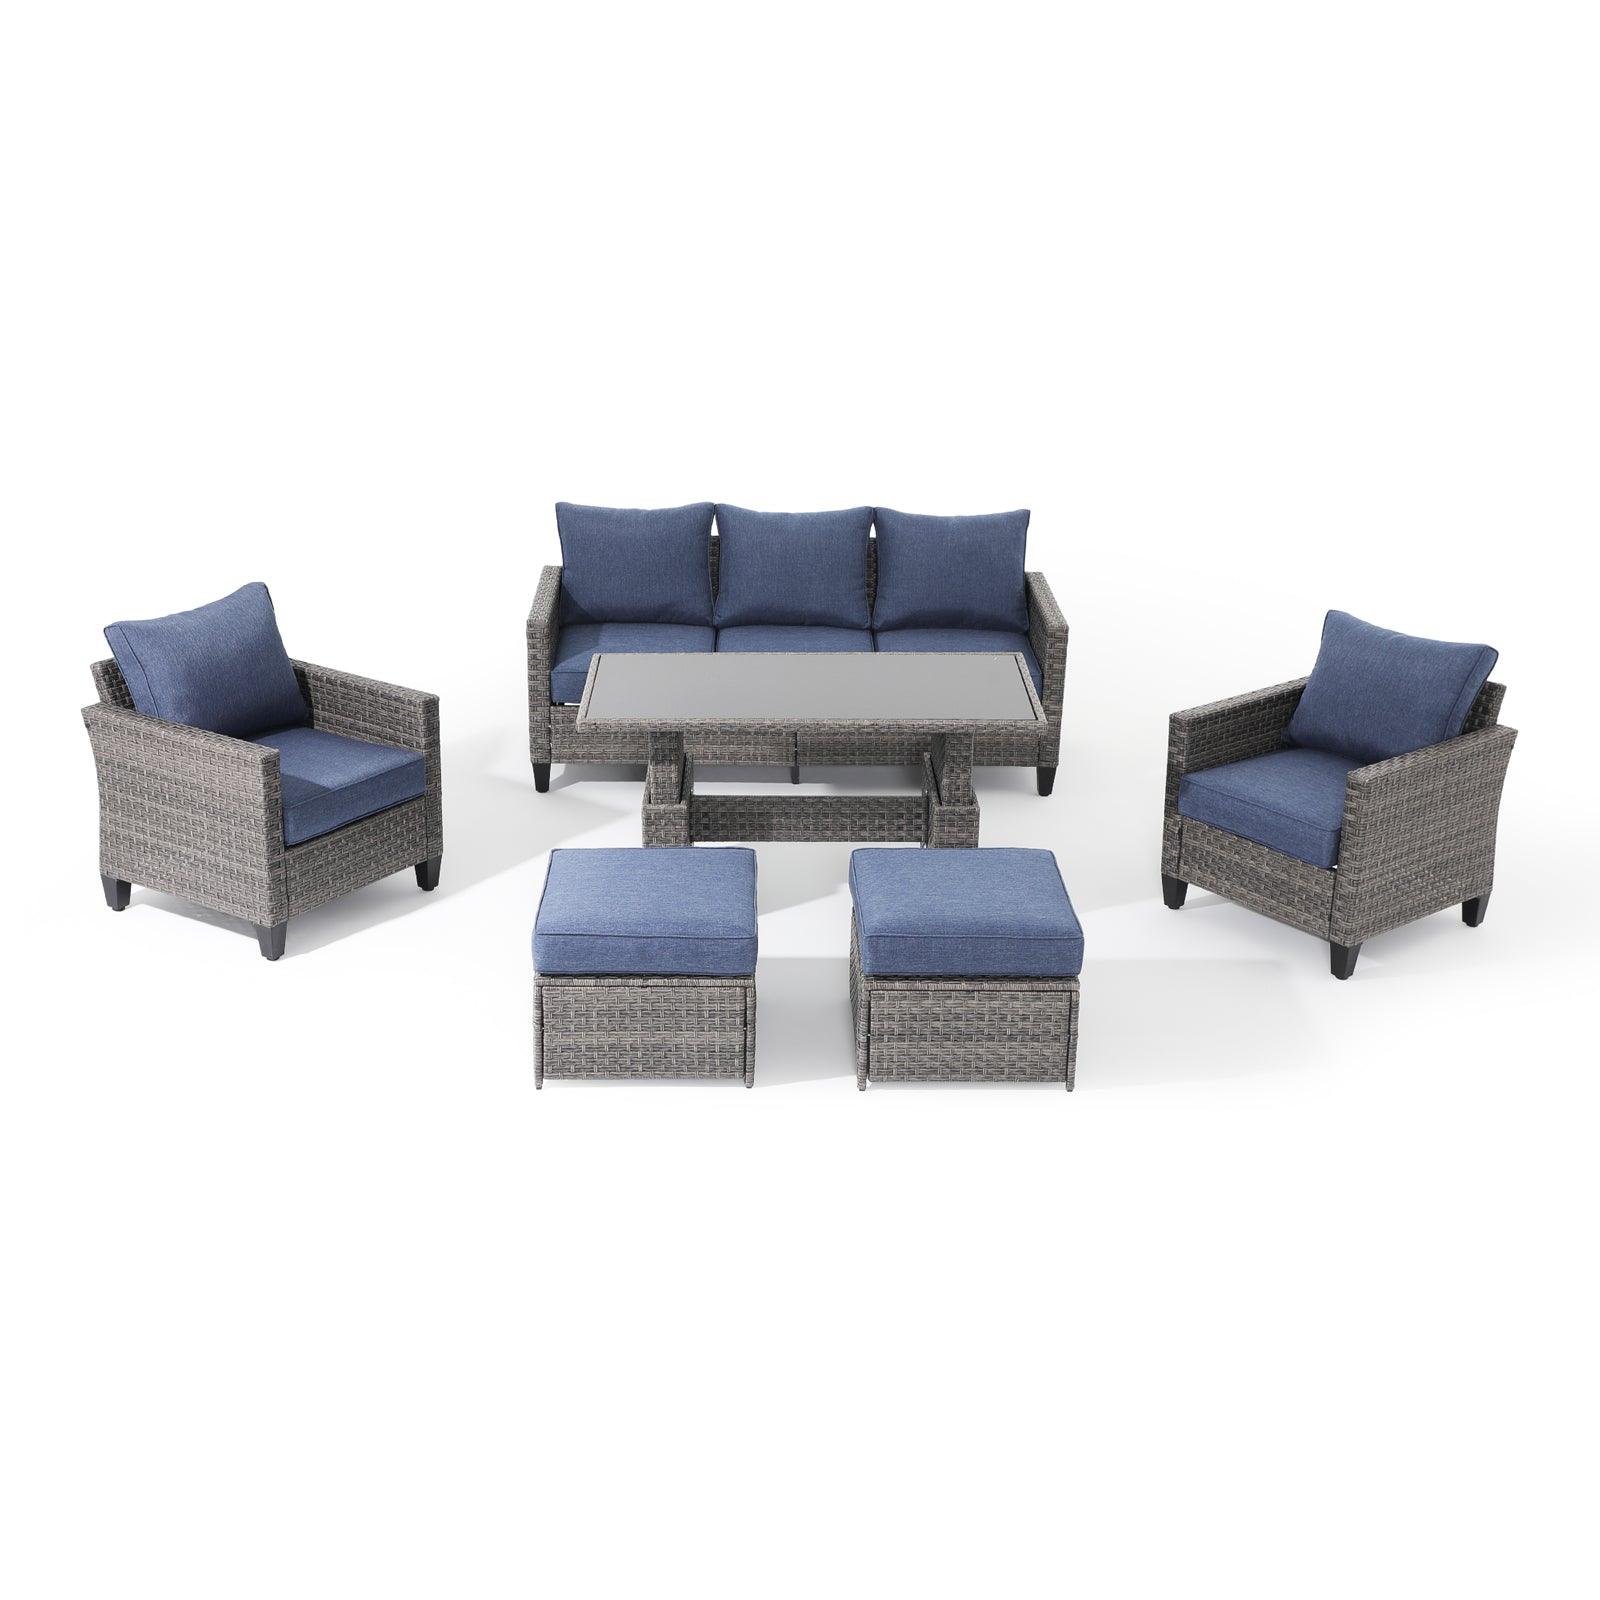 Ayia 6-Piece outdoor Sofa Set with Rattan design, Navy Blue cushions, a 3-seater sofa, 2 arm chairs , 2 ottomans, 1 lift-top outdoor table, front view - Jardina Furniture #color_Navy blue#piece_6-pc. with ottomans & Table